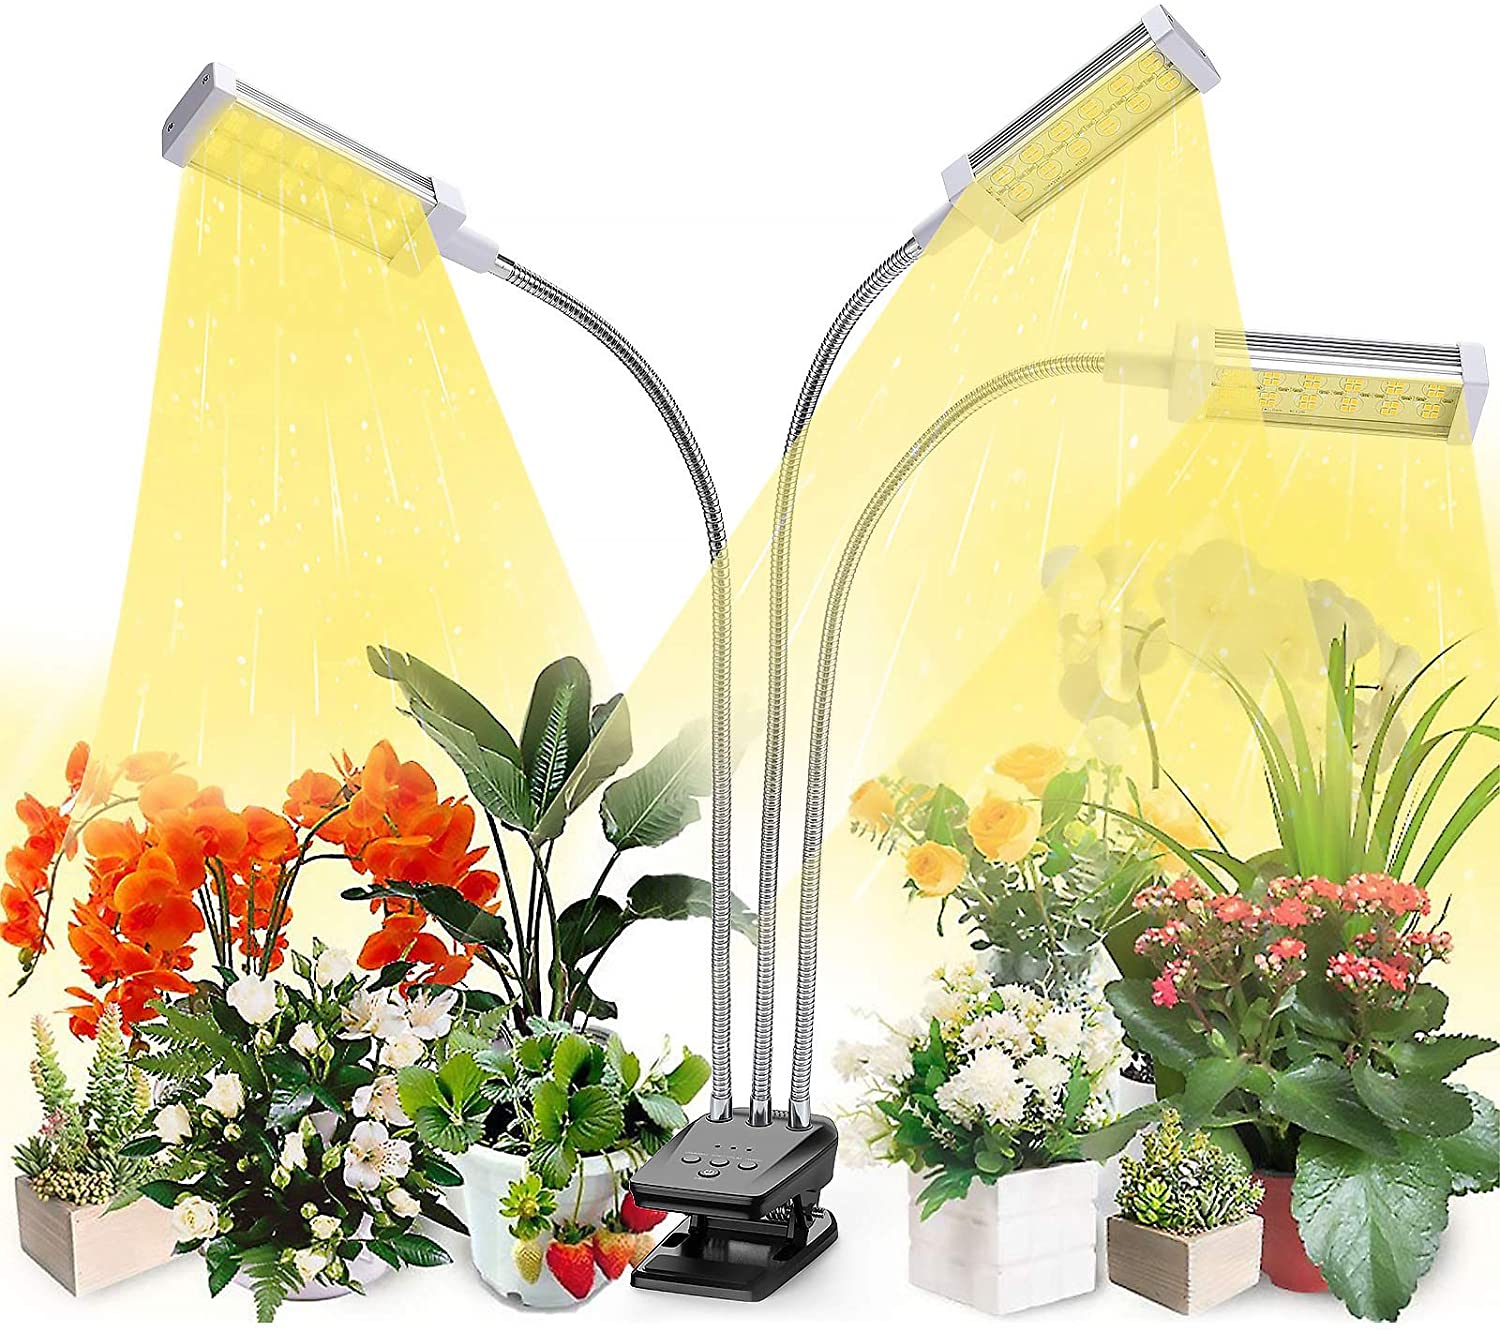 ''Grow Light for Indoor Plants, Full Spectrum Grow LAMP with Timer, Led Plant Light with Desk Clip an